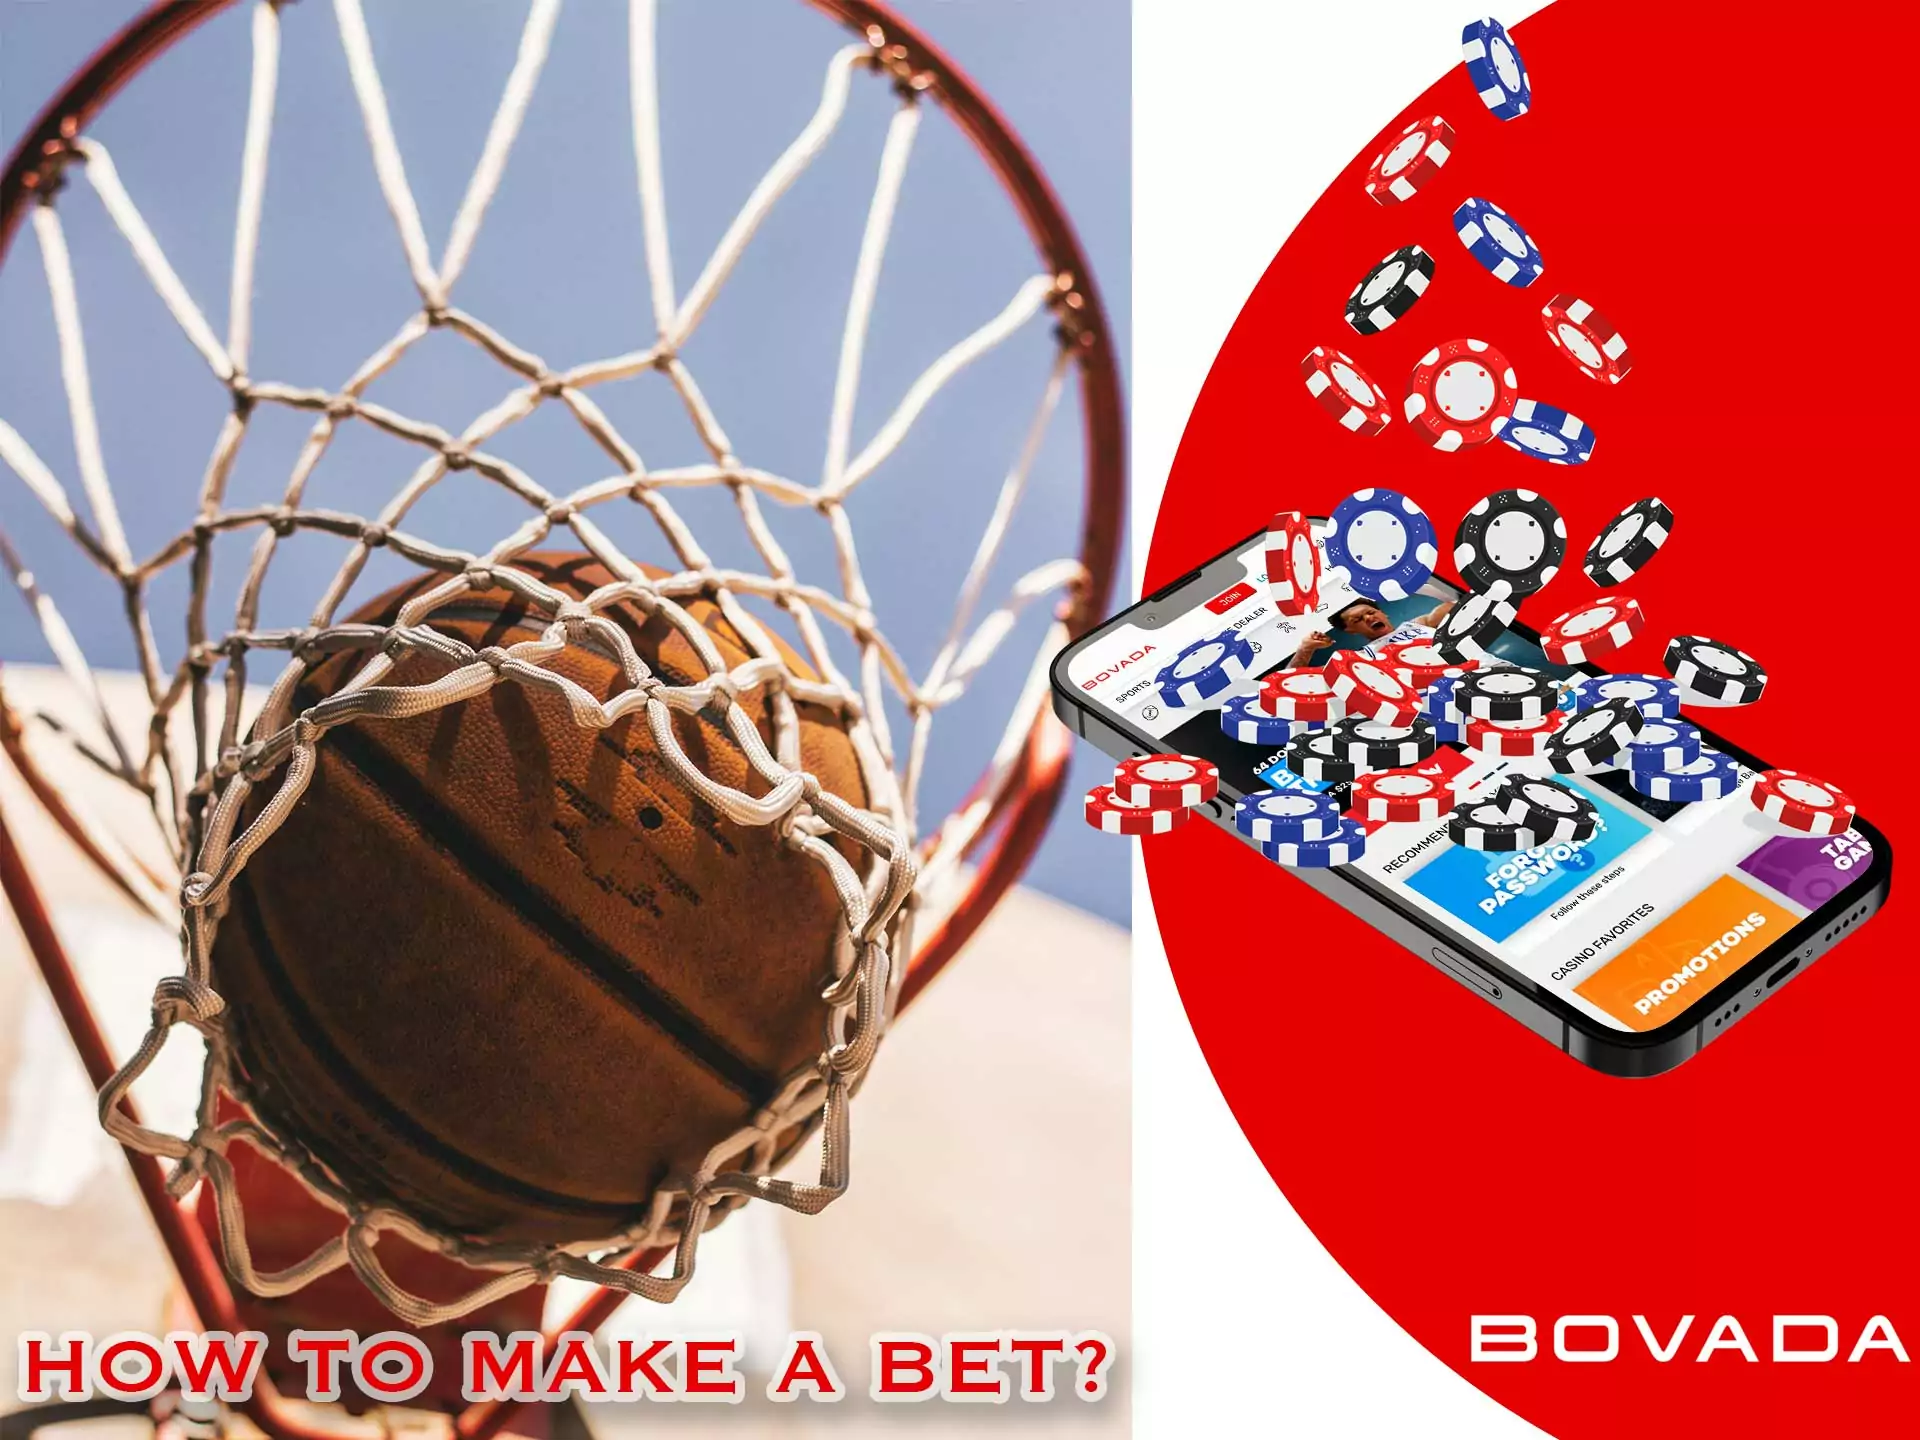 Instruction: how to place a bet in the Bovada app.